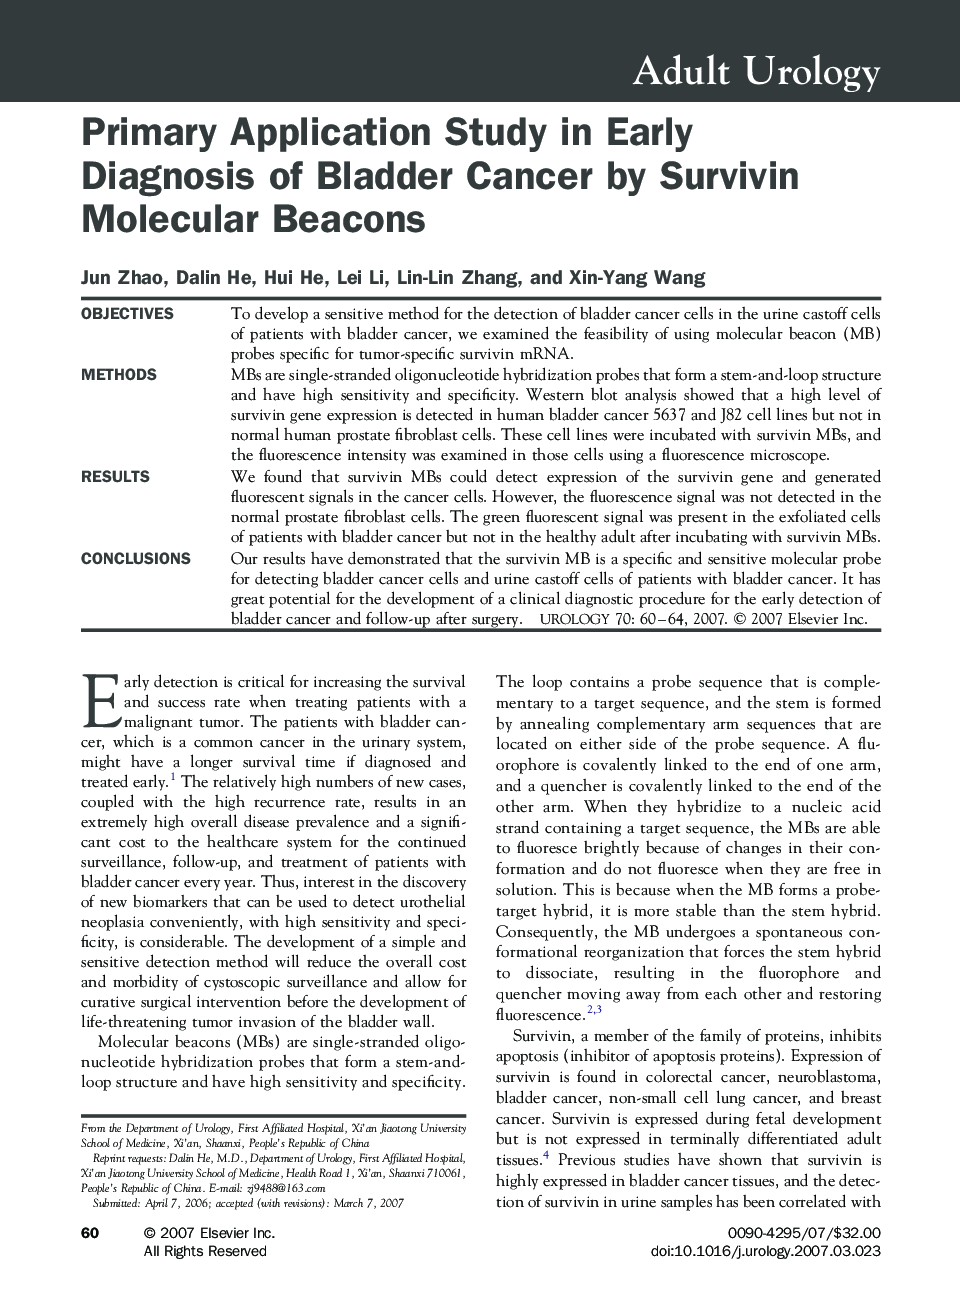 Primary Application Study in Early Diagnosis of Bladder Cancer by Survivin Molecular Beacons